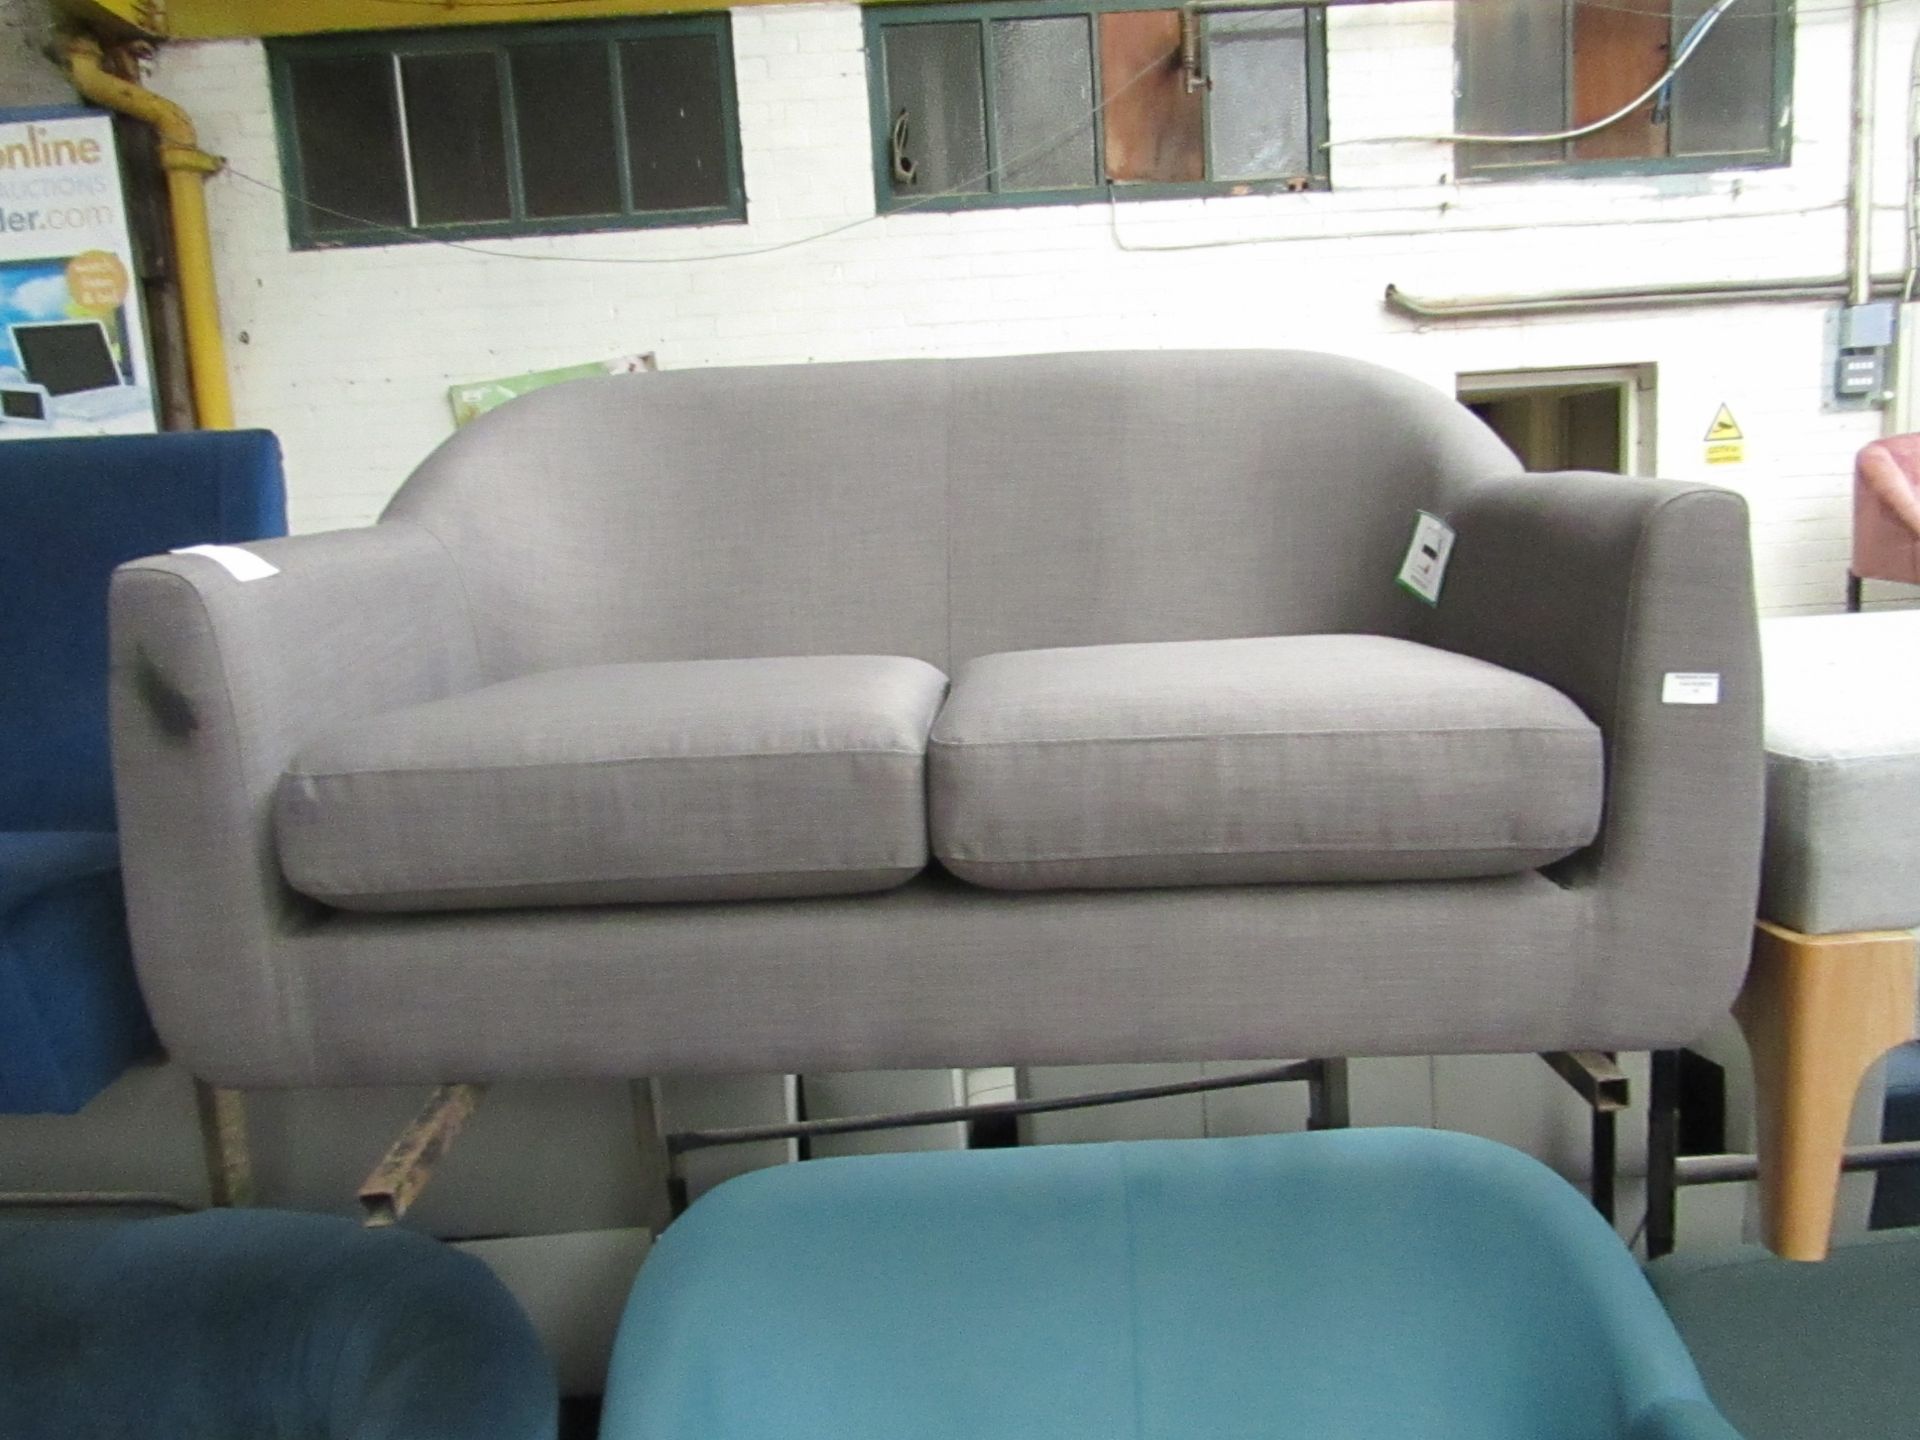 1 x Made.com Tubby 2 Seater Sofa Pewter Grey RRP œ299 SKU MAD-SOFTUBY48GRY-UK TOTAL RRP œ299 Has a